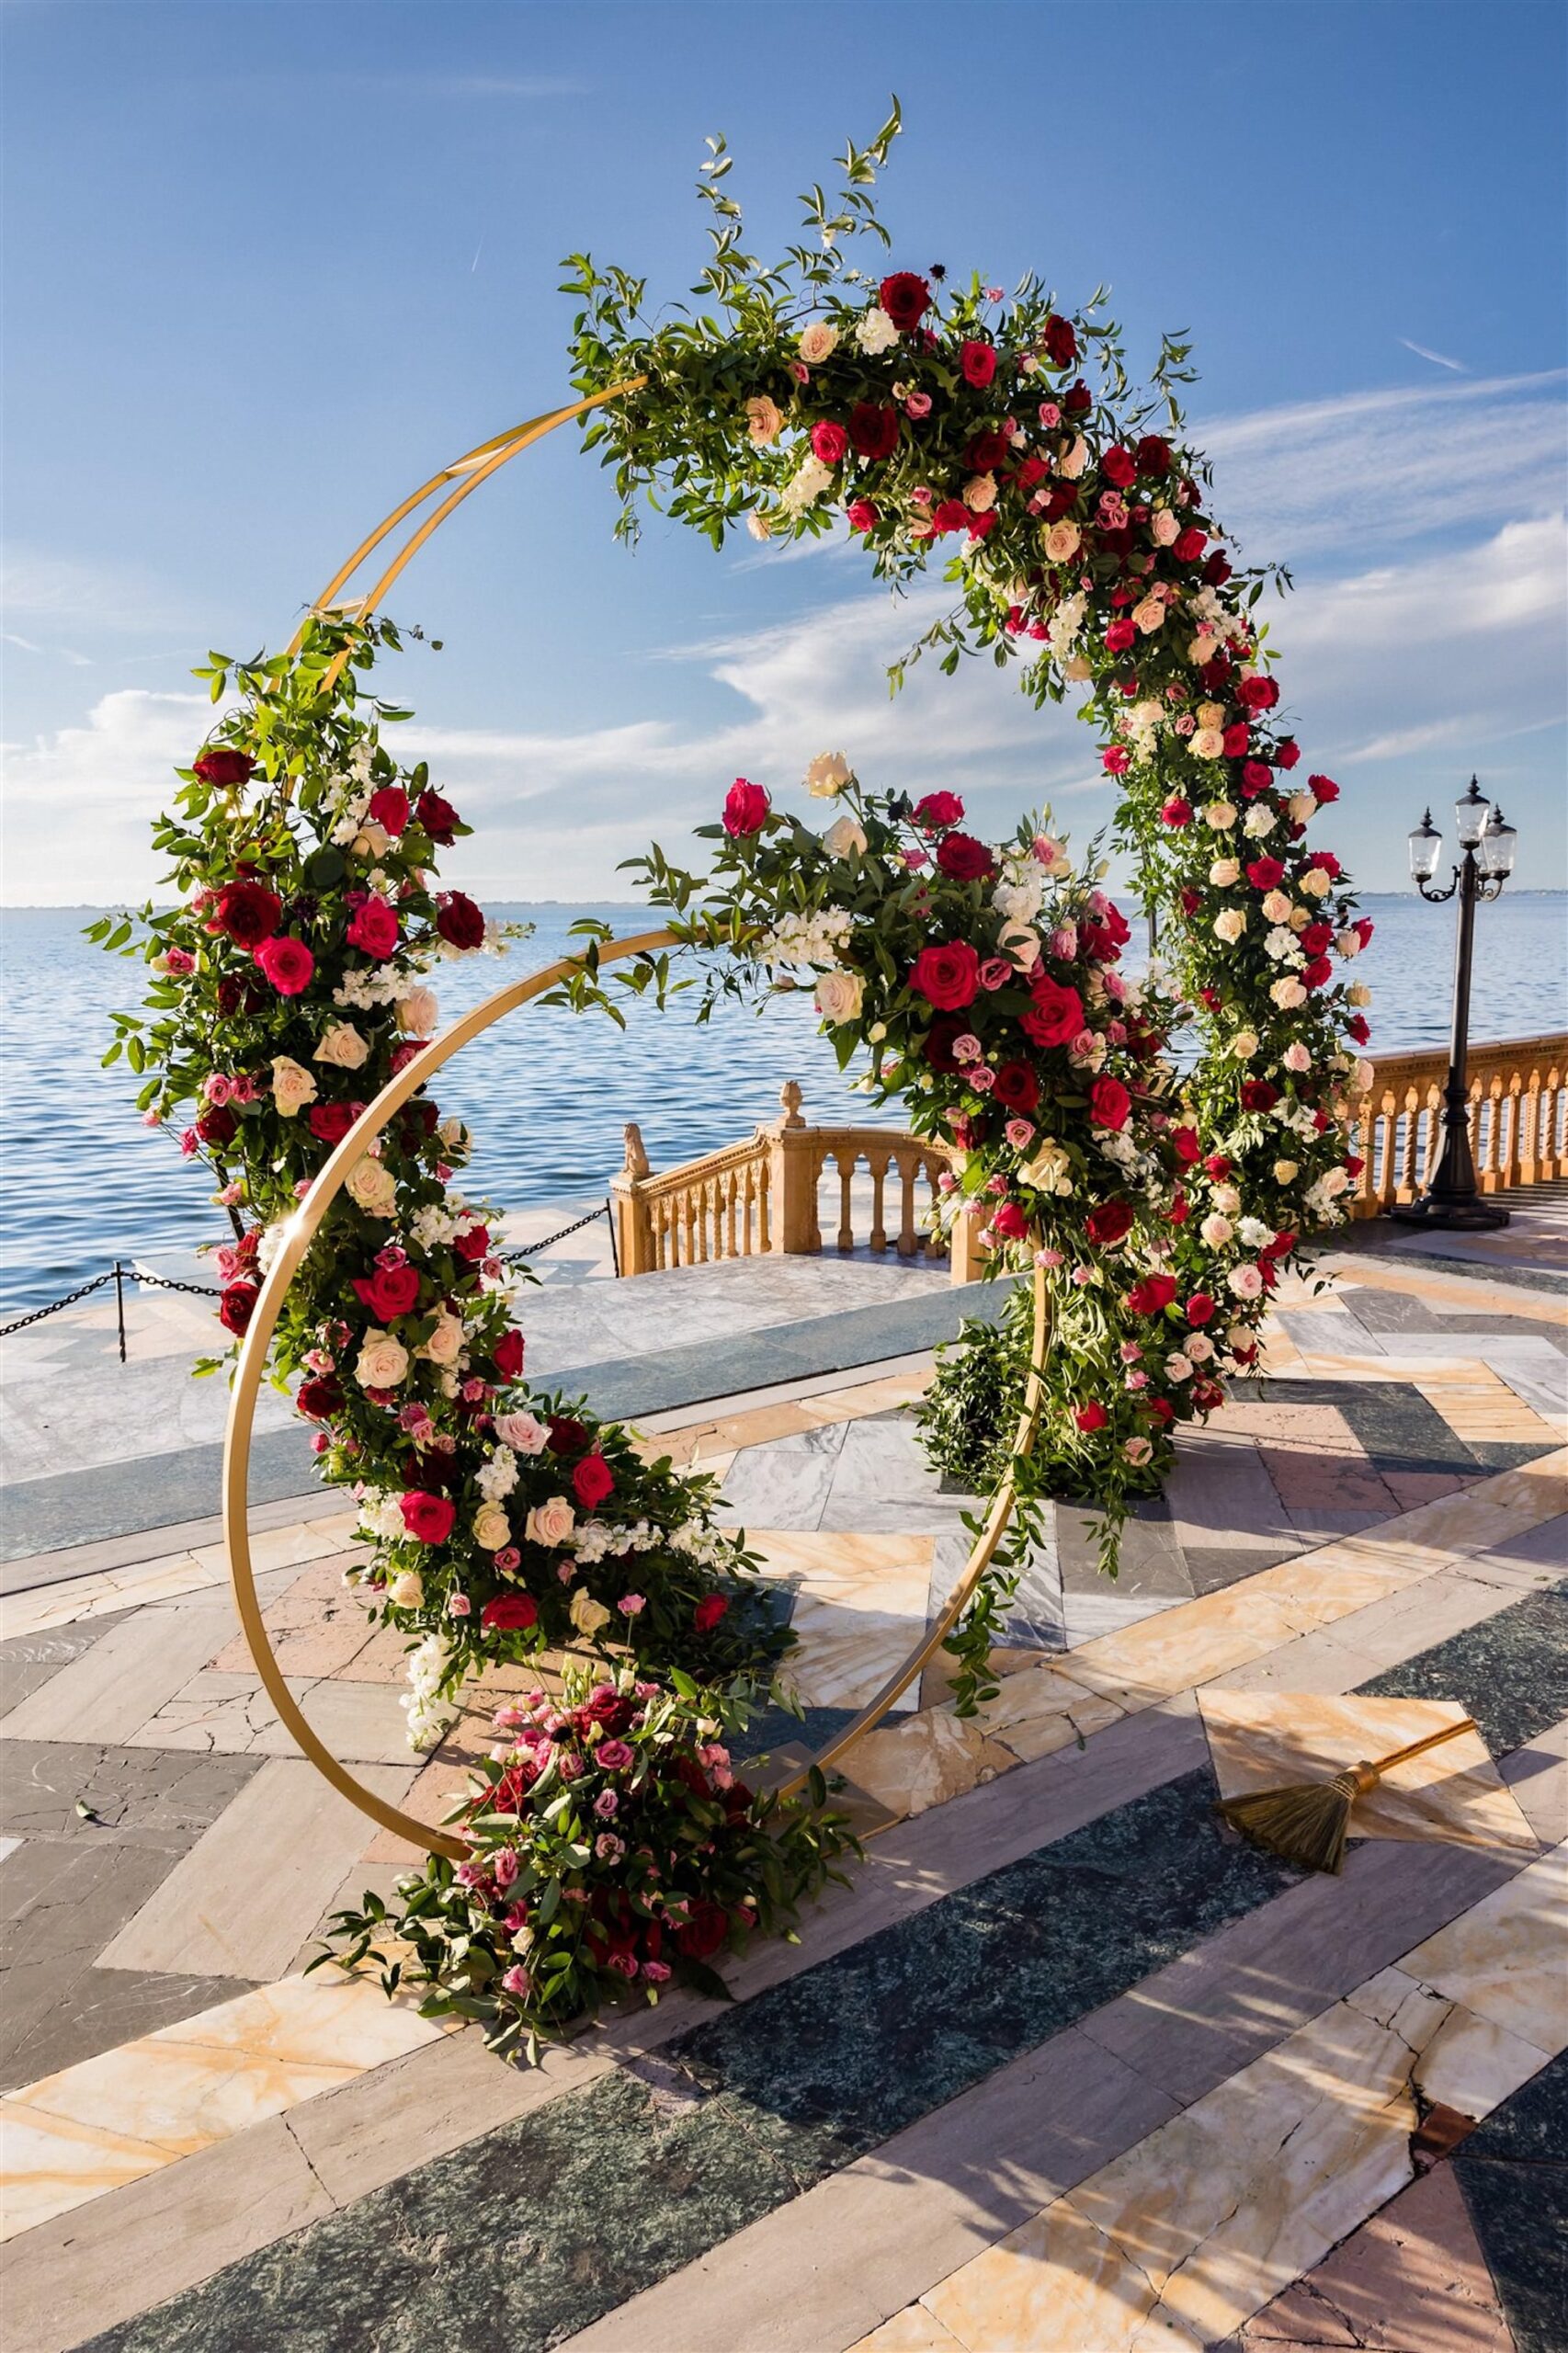 Gold Round Circular Hoop Arch with Red, Burgundy, Pink Roses and Ruscus Greenery | Sarasota Waterfront Wedding Ceremony Venue The Ringling Museum | Florist FH Events